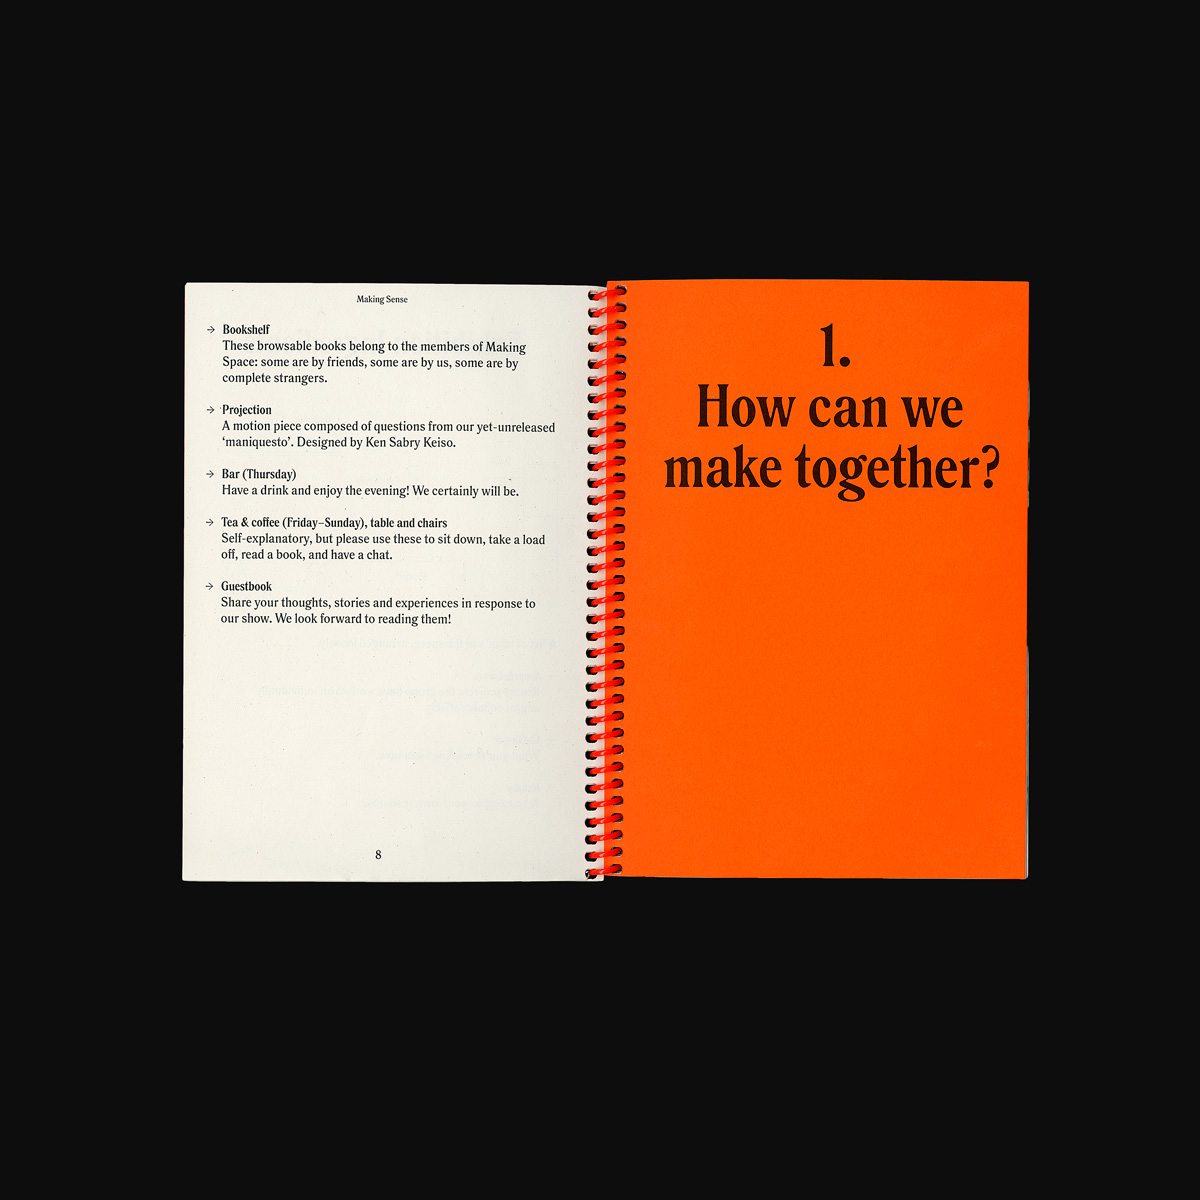 A spread from the Making Sense catalogue, showing an orange chapter opening page with black text which reads: ‘1. How can we make together?’